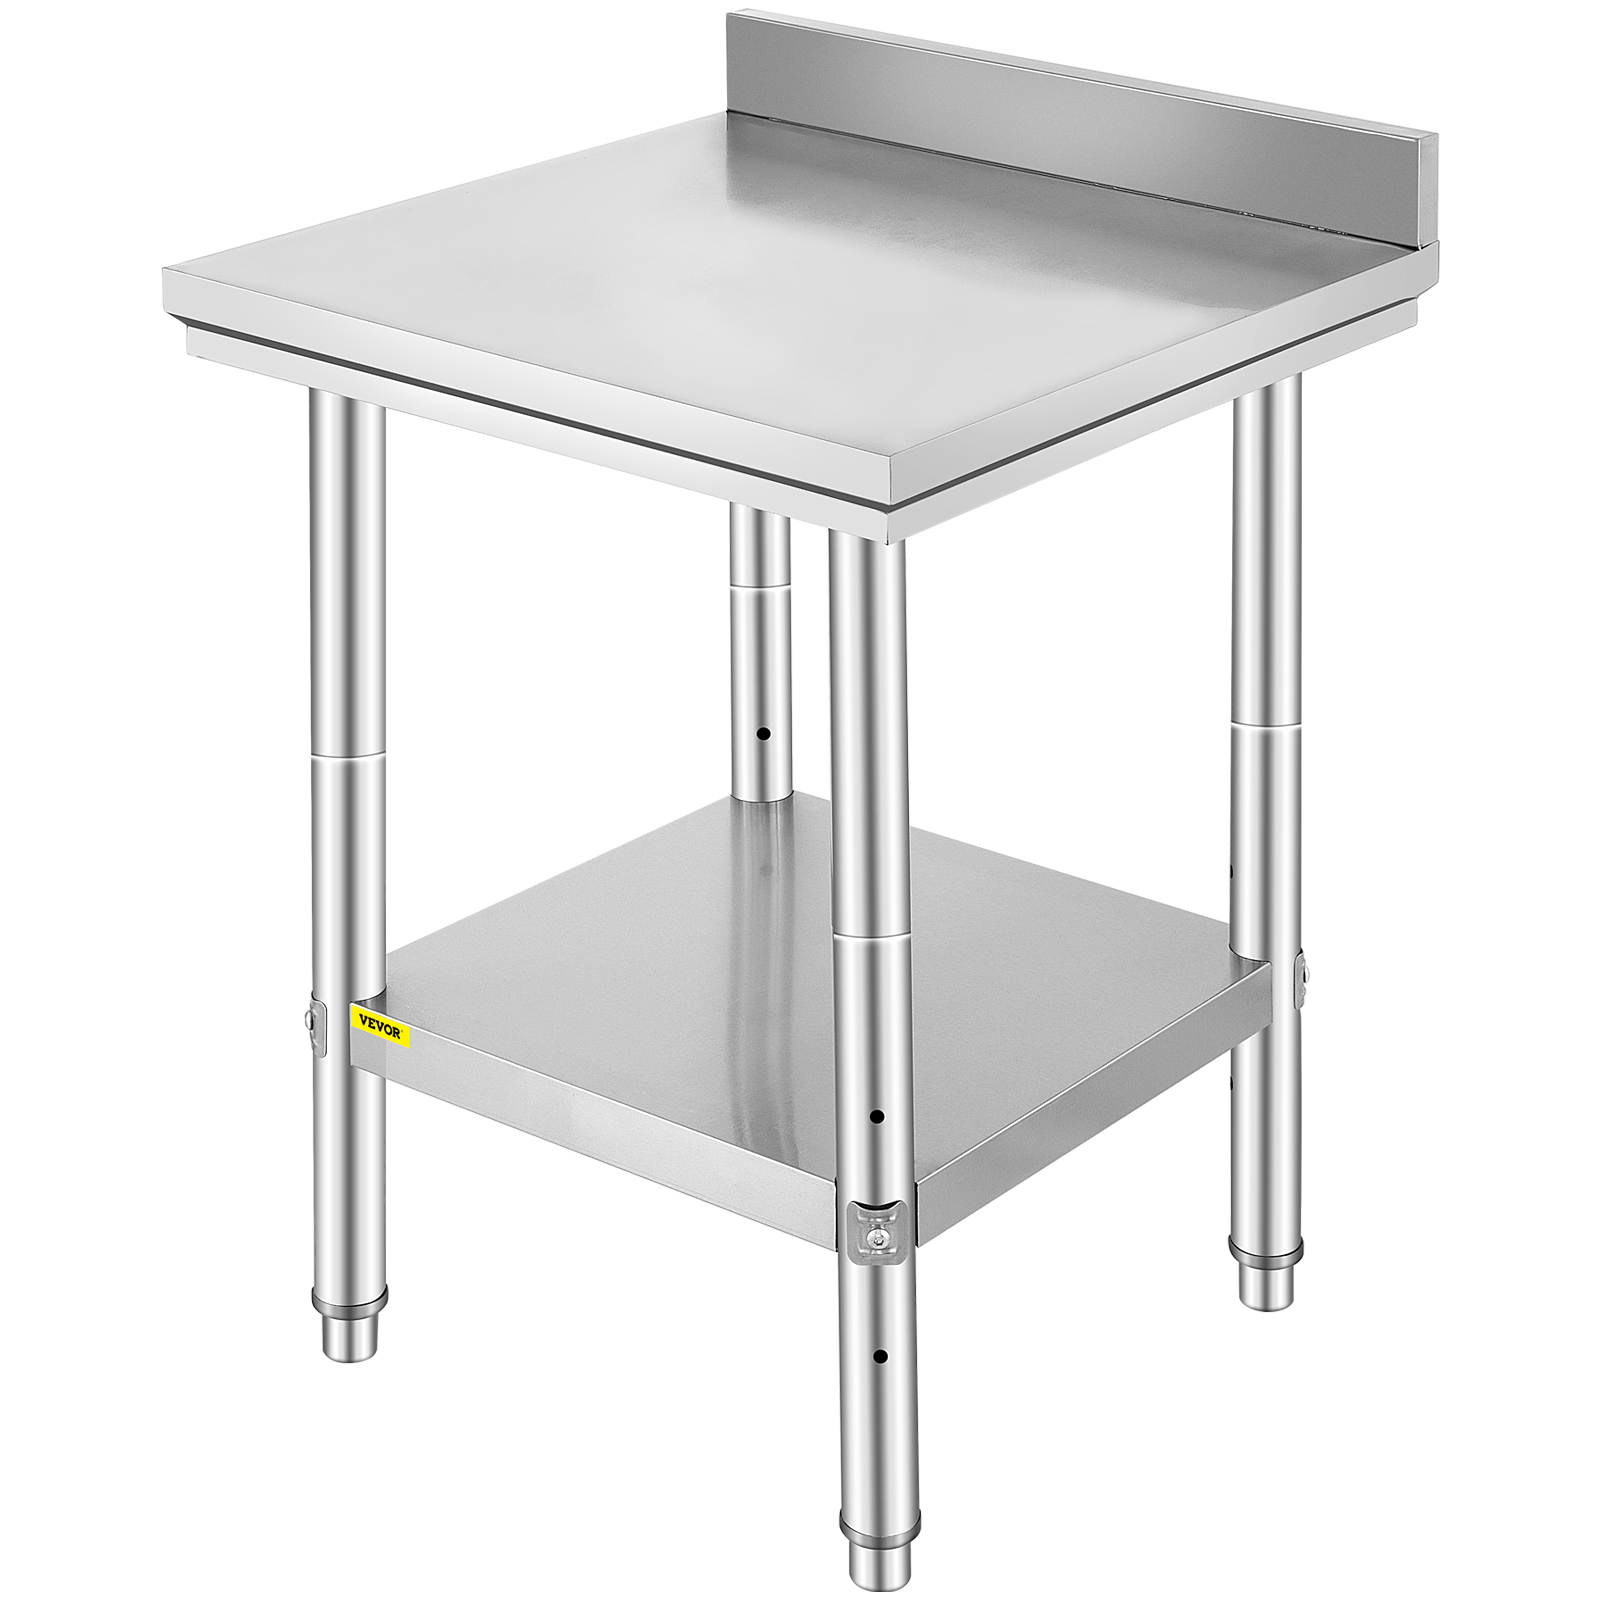 VEVOR VEVOR Table 24 x 24 x 34 Inches NSF Stainless Steel Table for Commercial Kitchen Prep Workbench 60X60X88cm with Lower Shelf Work Table Silvery for Commercial Kitchen Restaurant | VEVOR EU